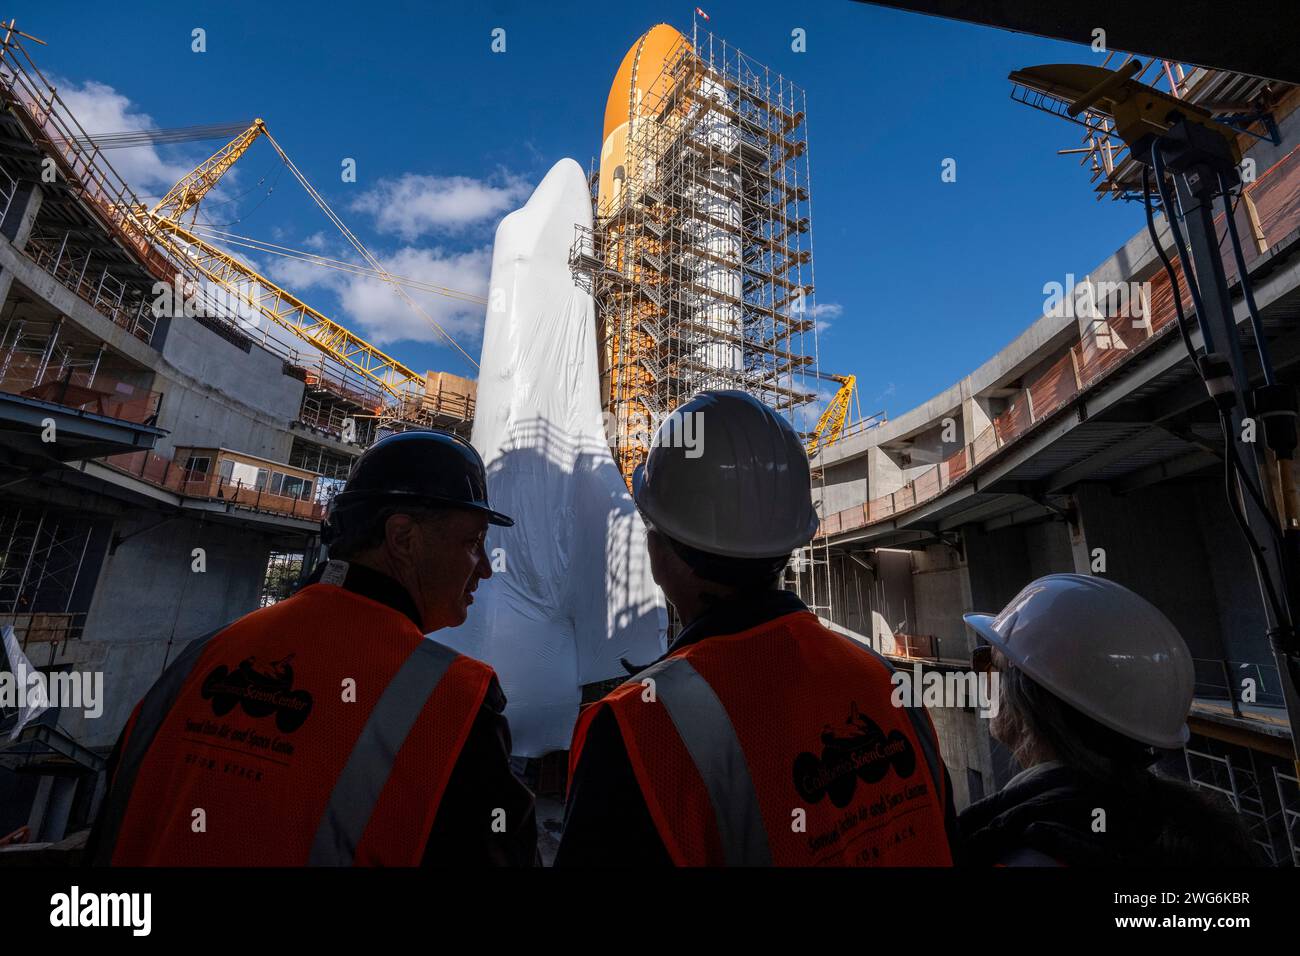 Space Shuttle Endeavour is seen in vertical launch configuration with its two solid rocket boosters and external fuel tank 94 (ET-94) at the Samuel Oschin Air and Space Center construction site at The California Science Center in Los Angeles. Stock Photo